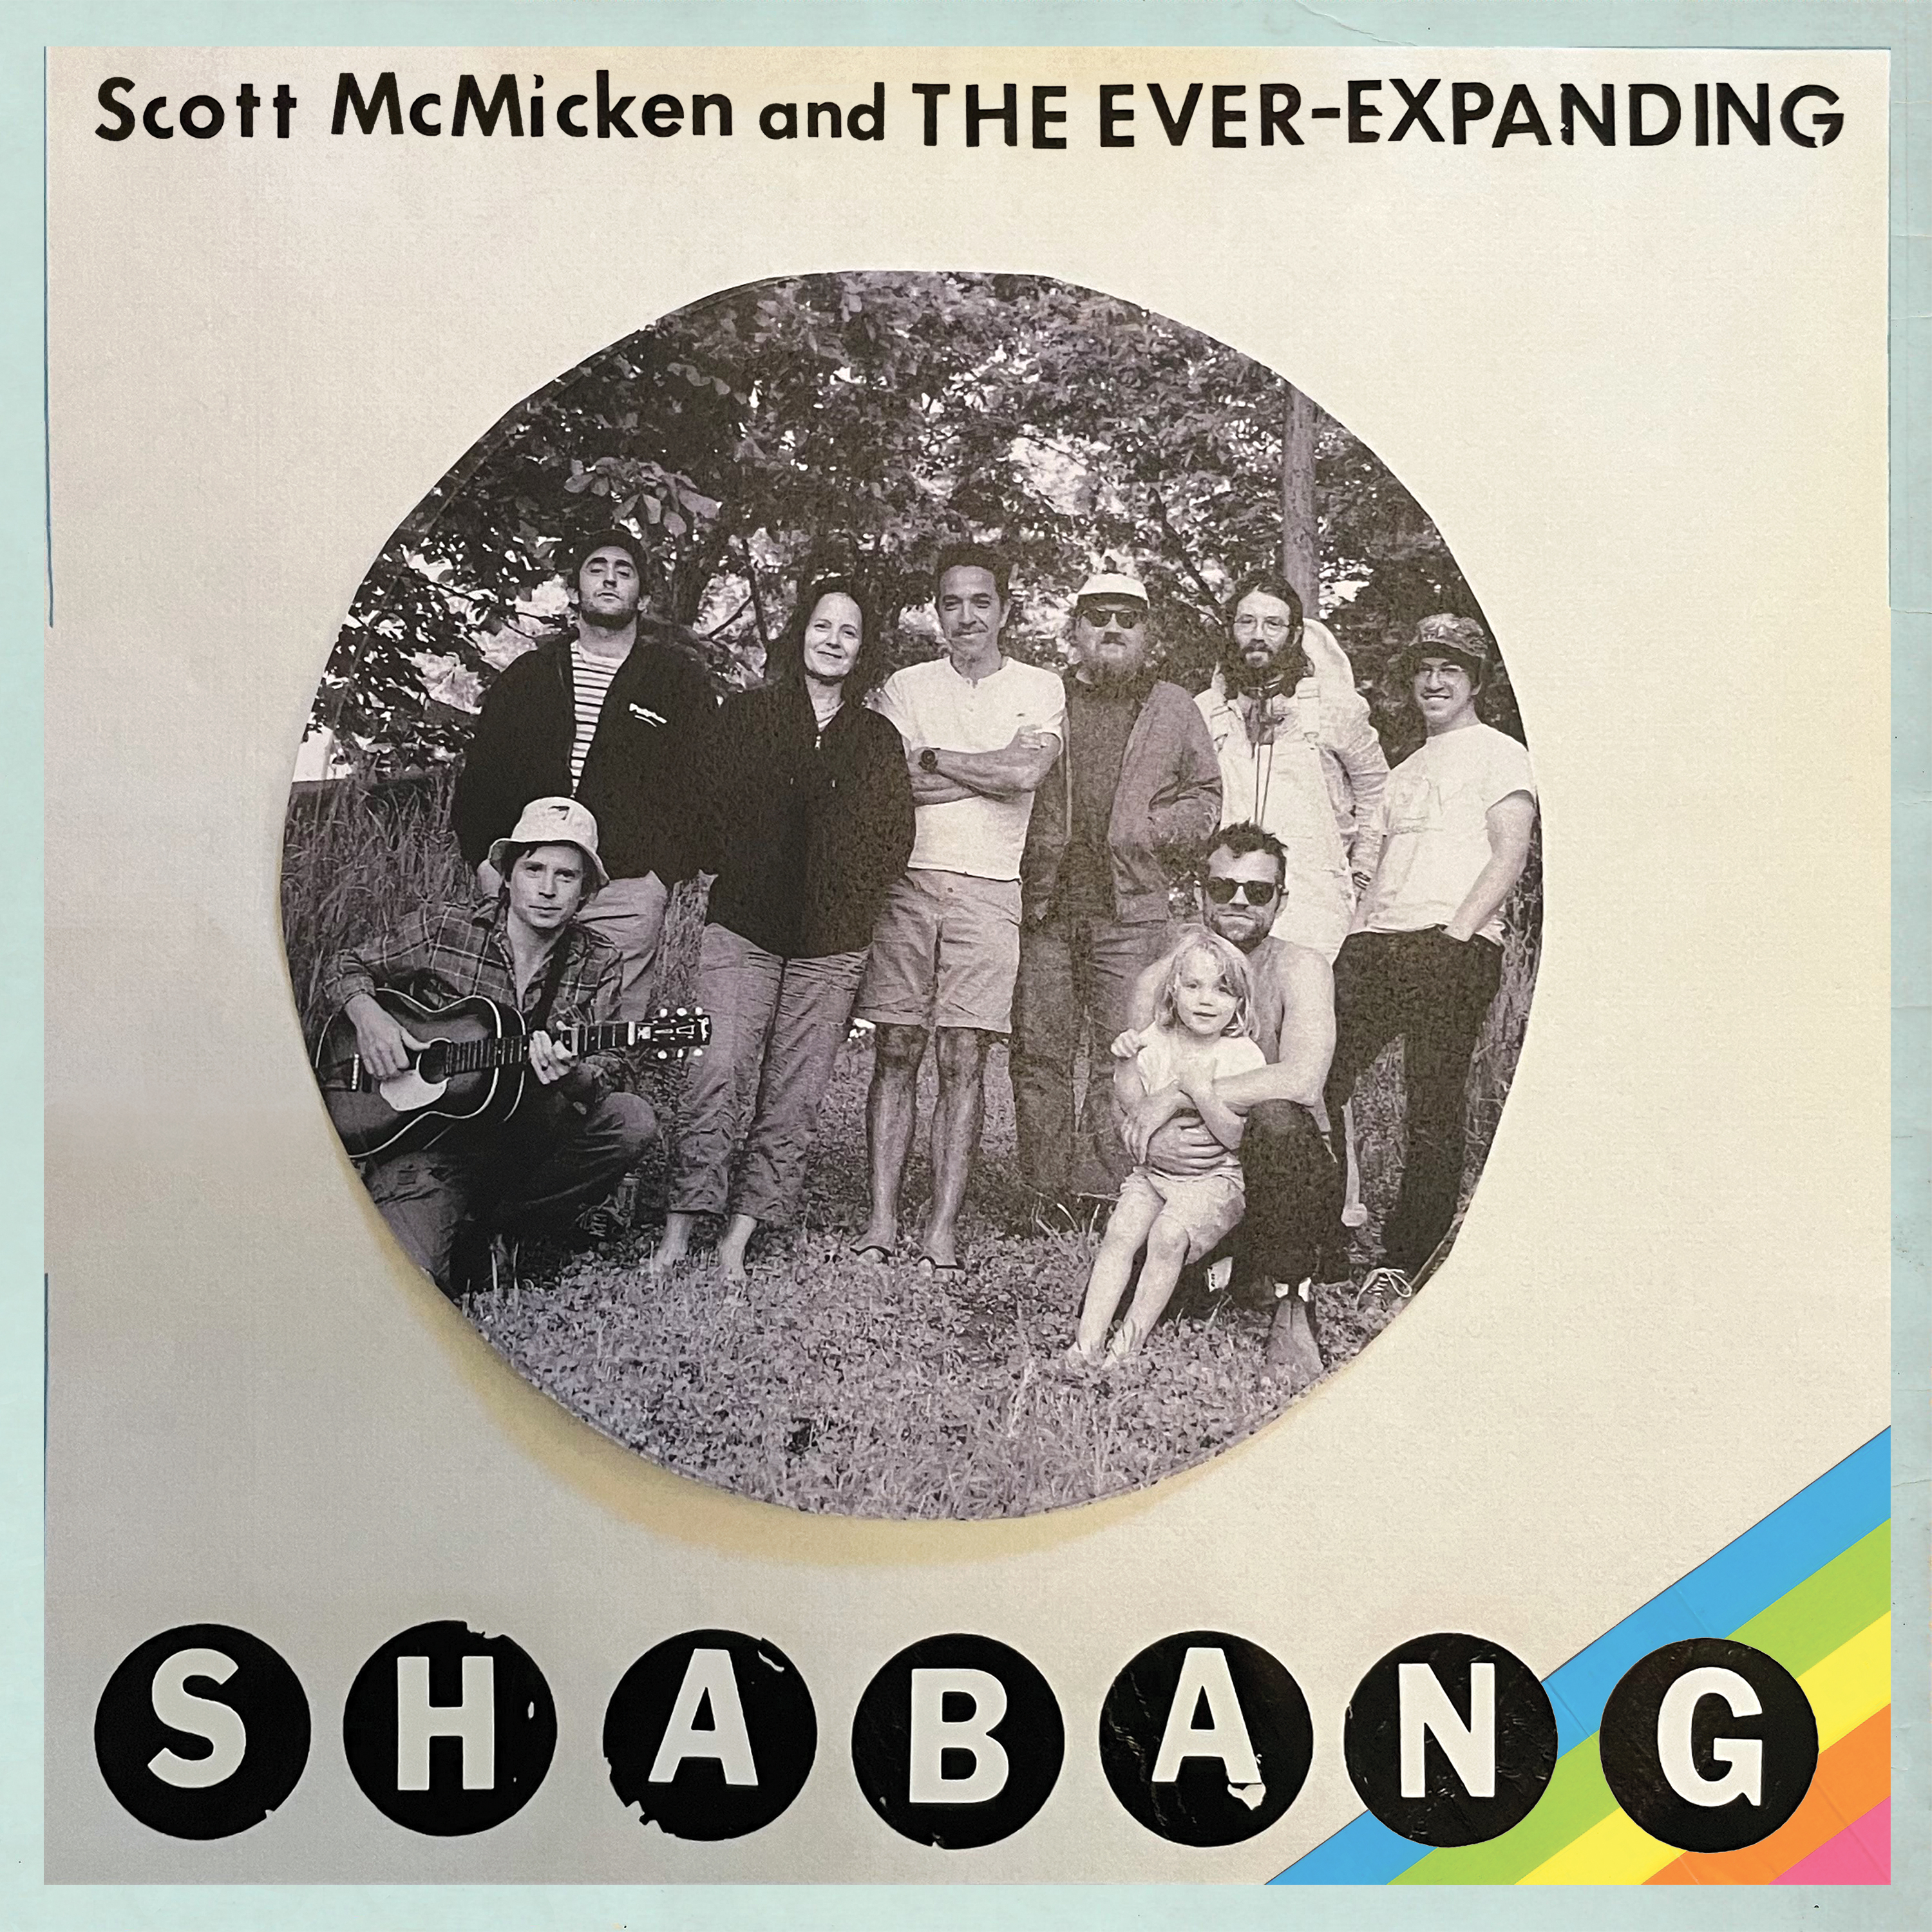 Scott McMicken and THE EVER EXPANDING - Shabang